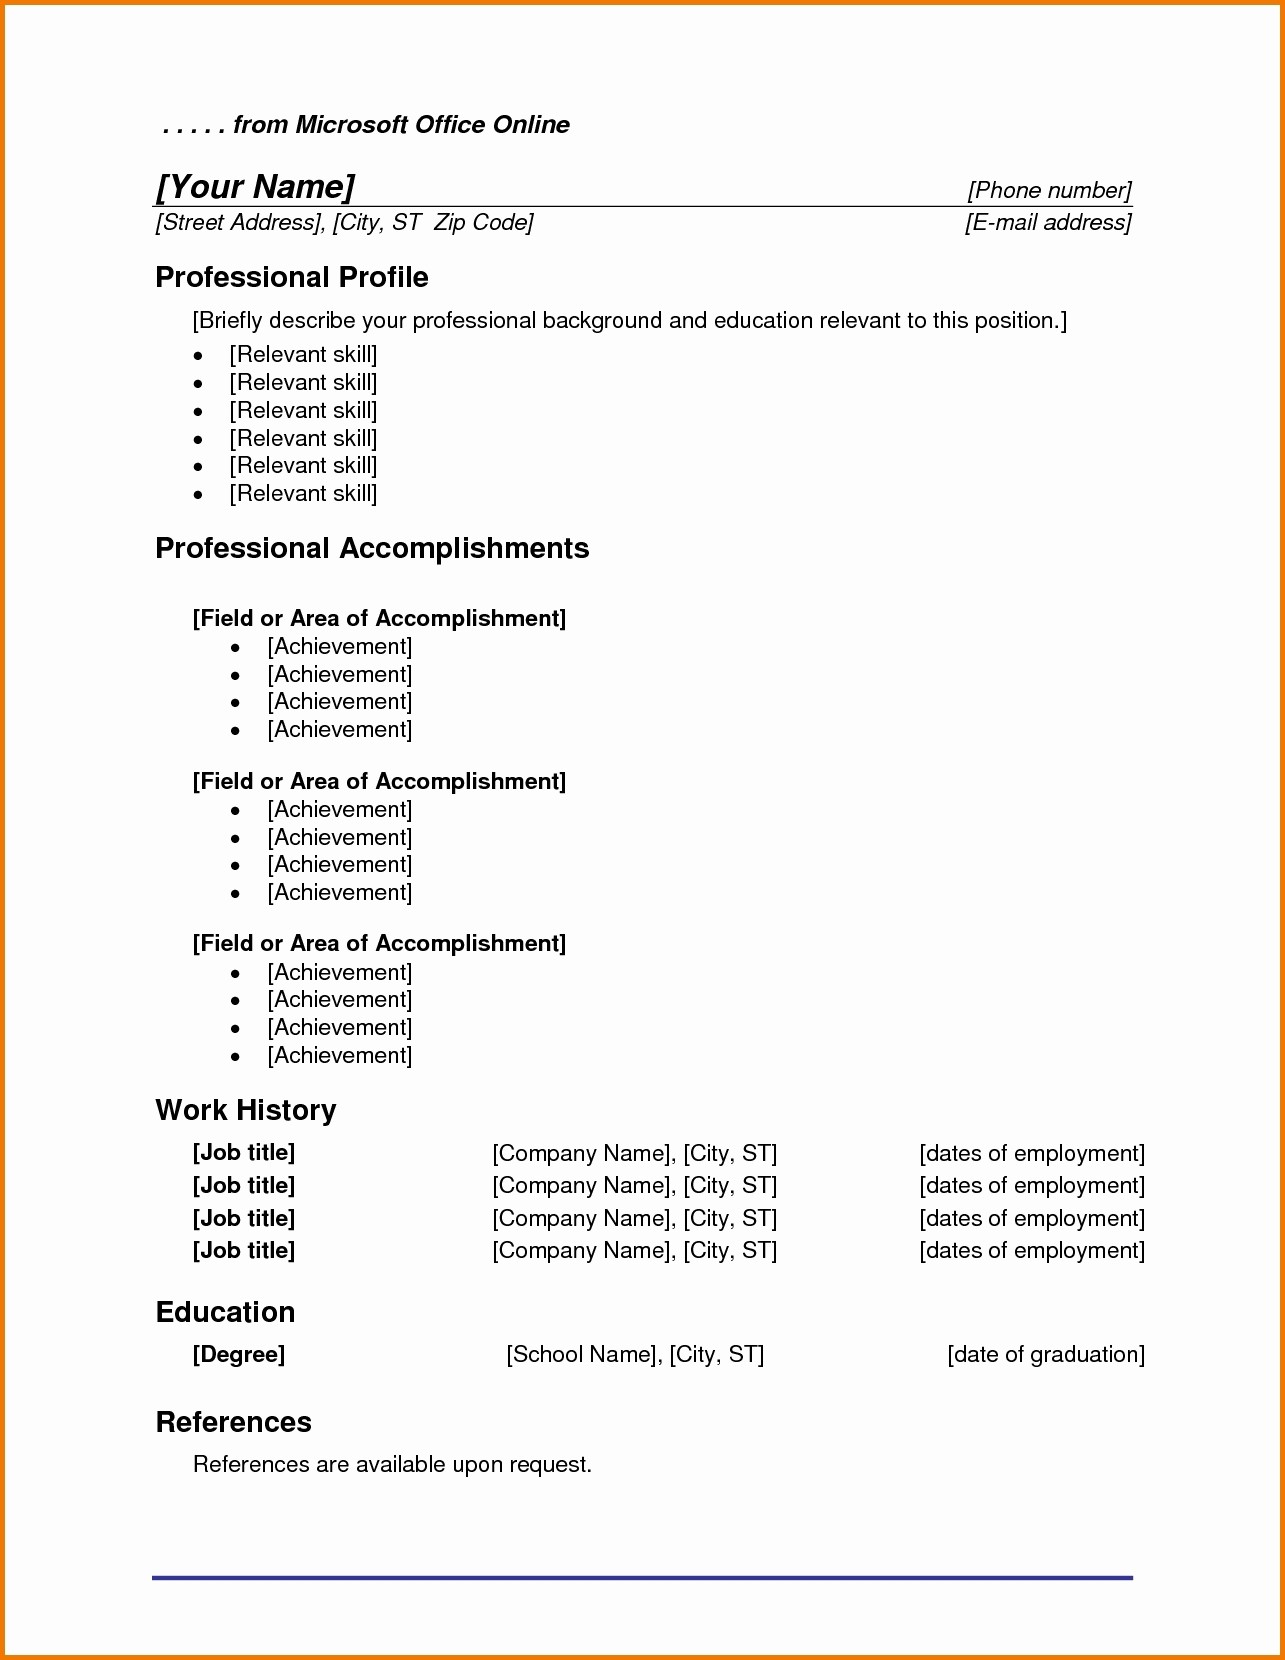 Microsoft Word Resume Templates 2014 Awesome Microsoft Fice Resume Templates 2014 Resume Ideas